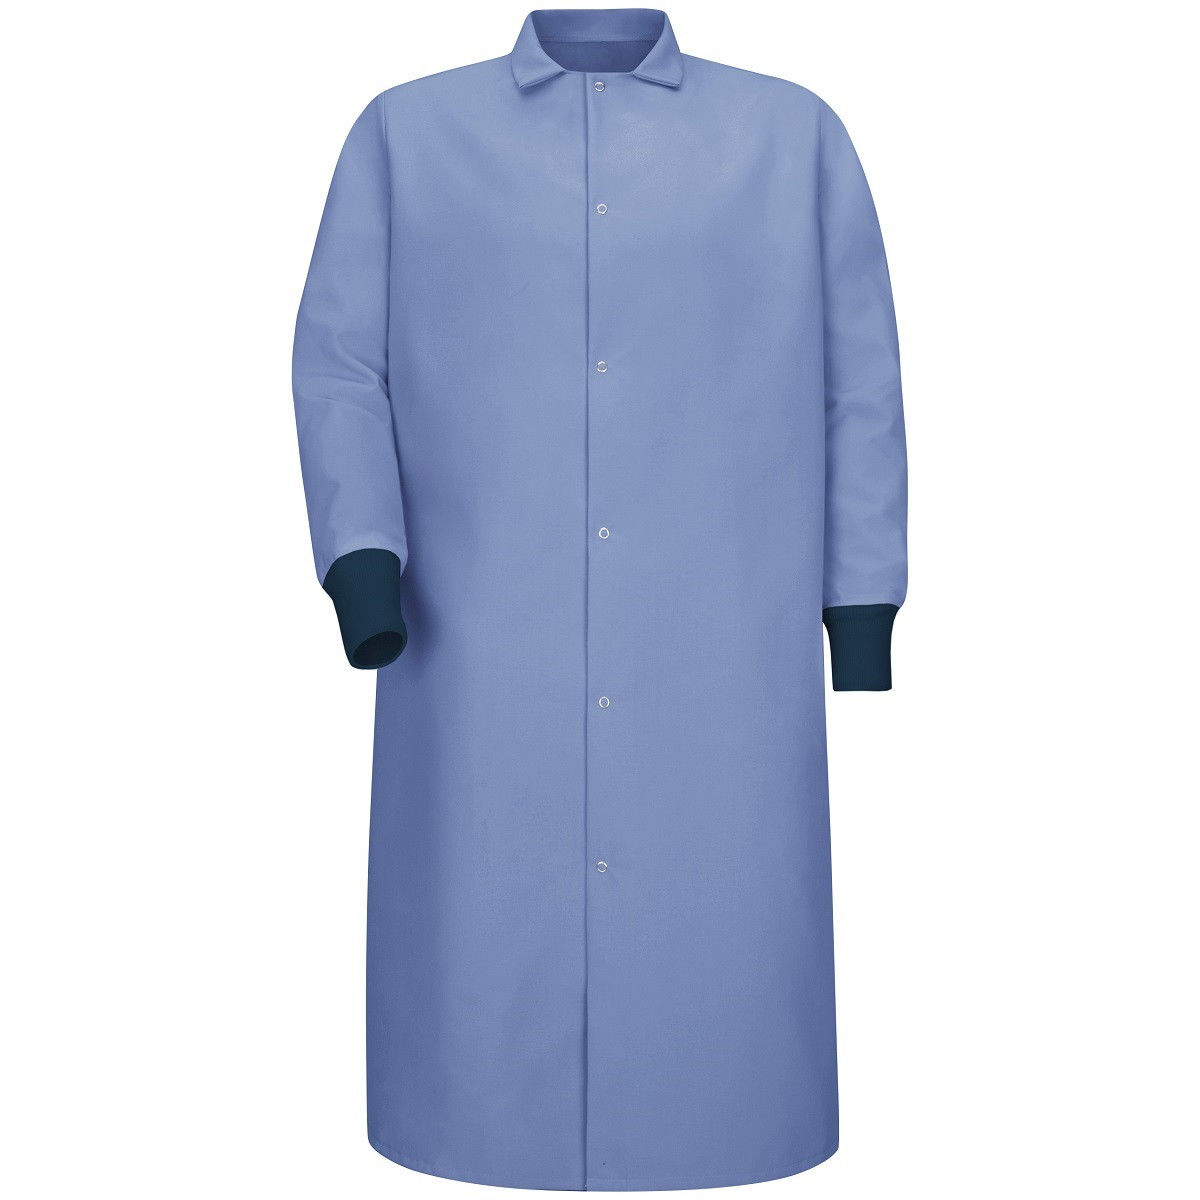 What features does the Red Kap KS60LB butcher coat have on its cuffs and front?